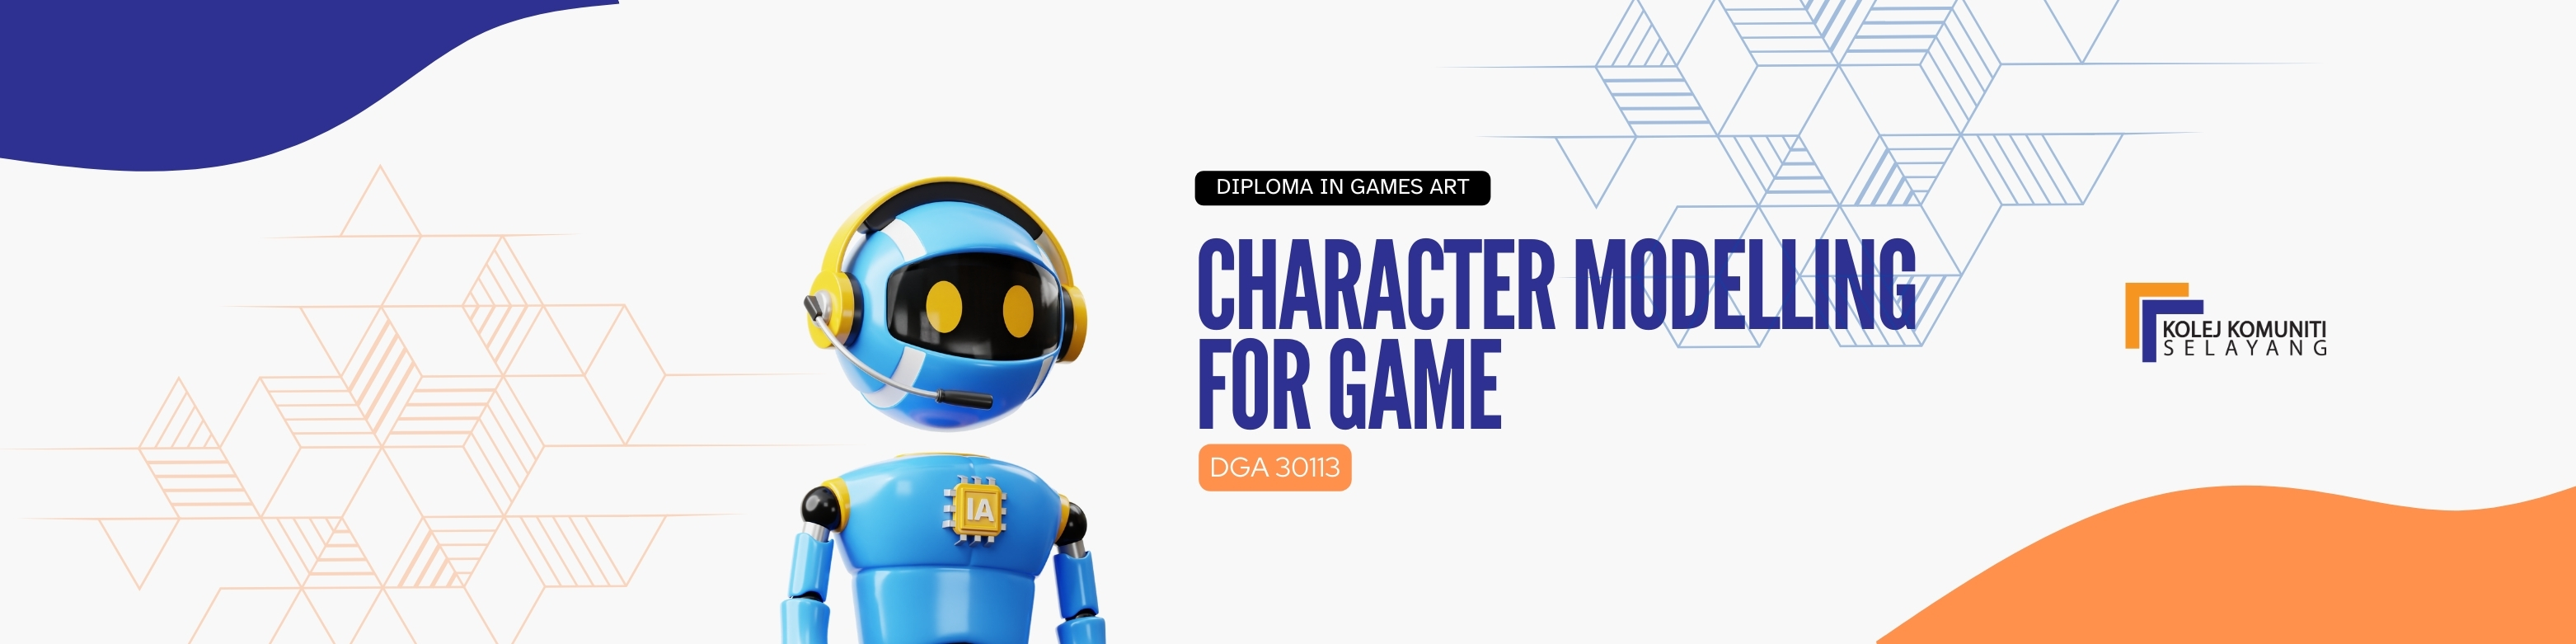 DGA30113 - CHARACTER MODELLING FOR GAME